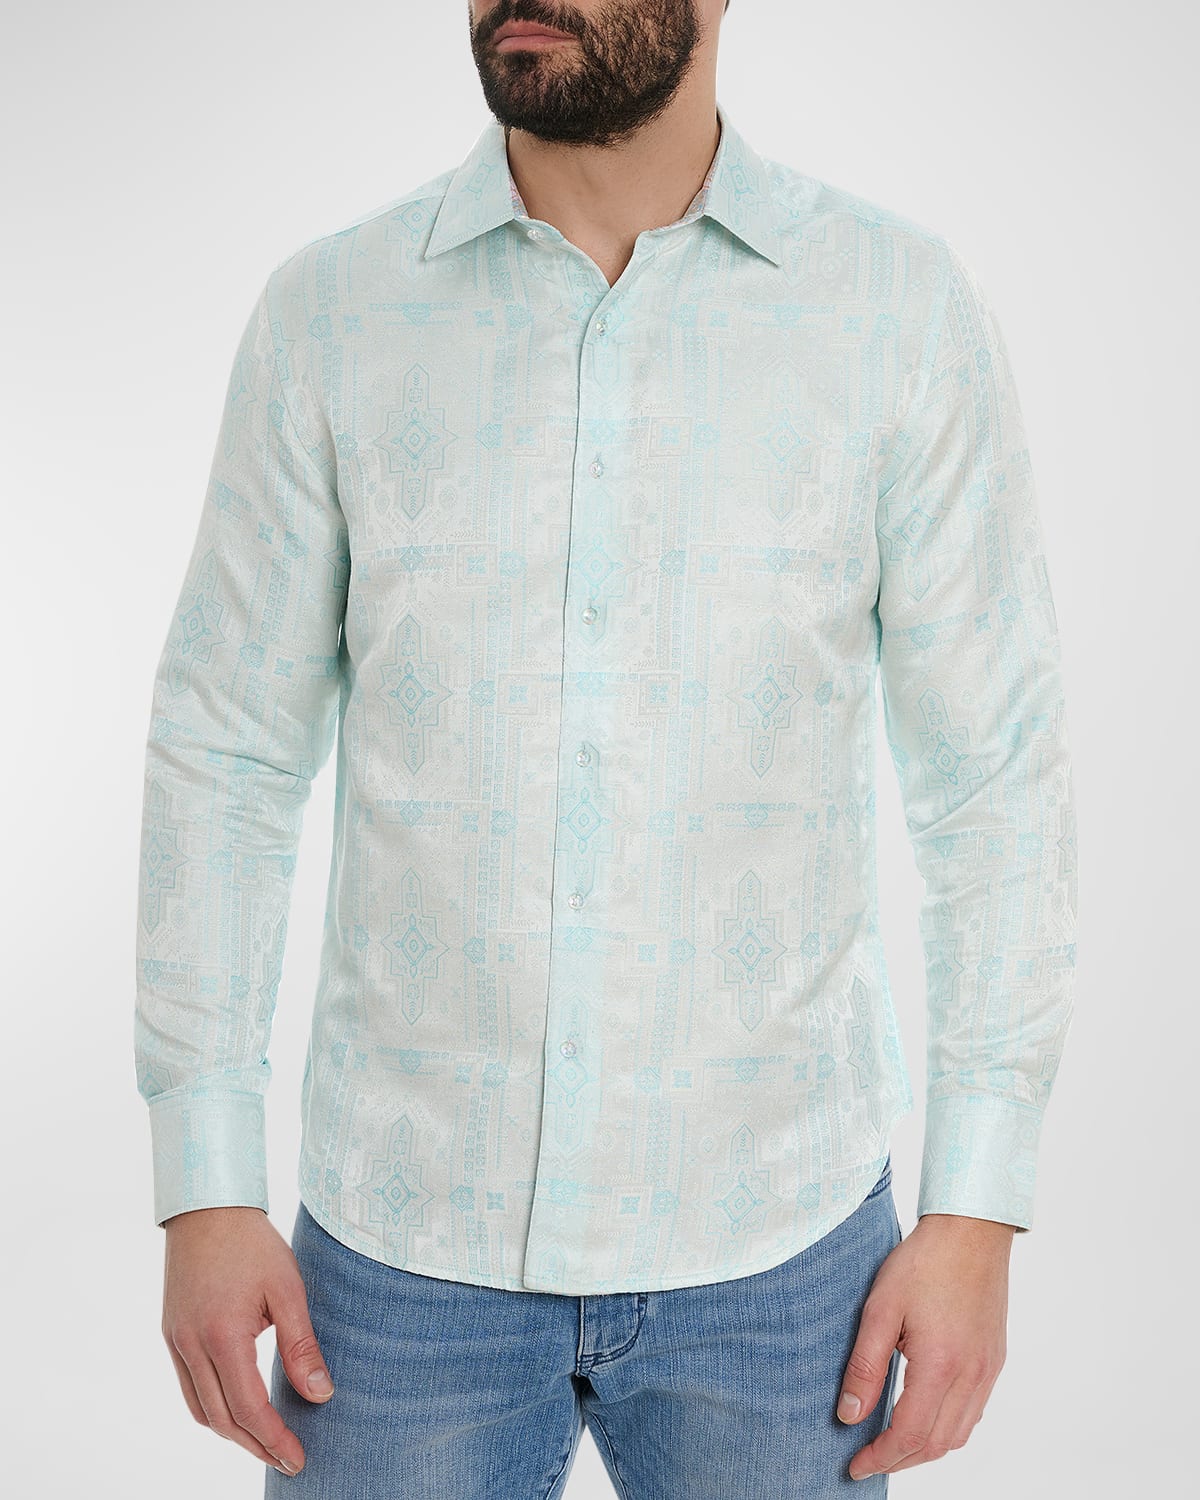 Men's The Timeless Limited Edition Sport Shirt